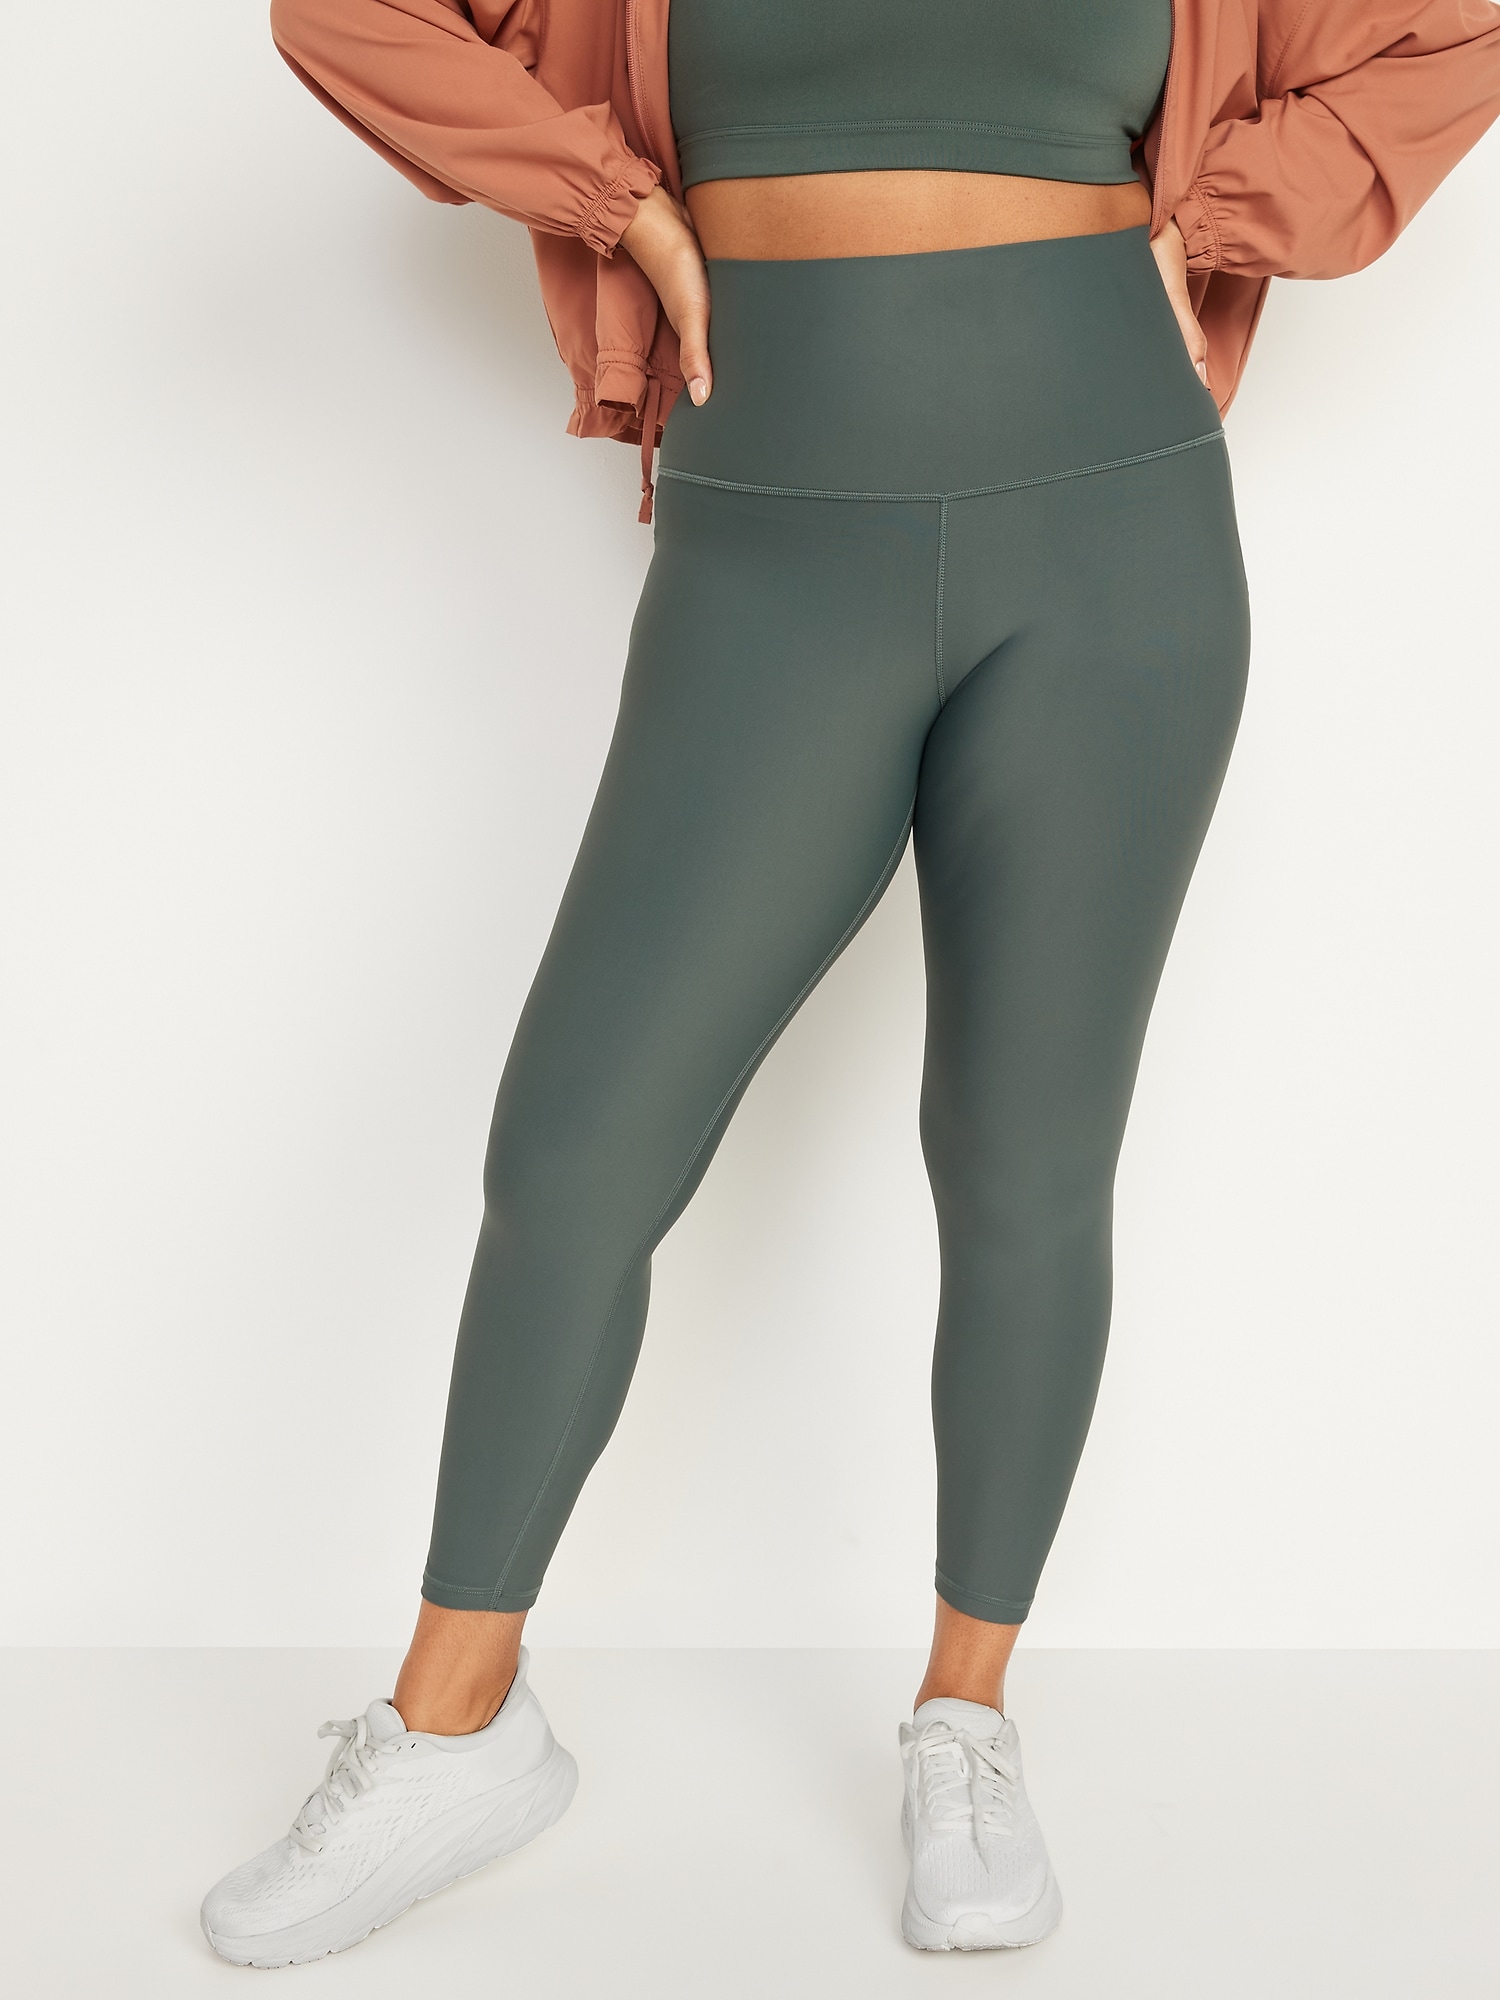 Active by Old Navy Solid Green Leggings Size XXL - 52% off